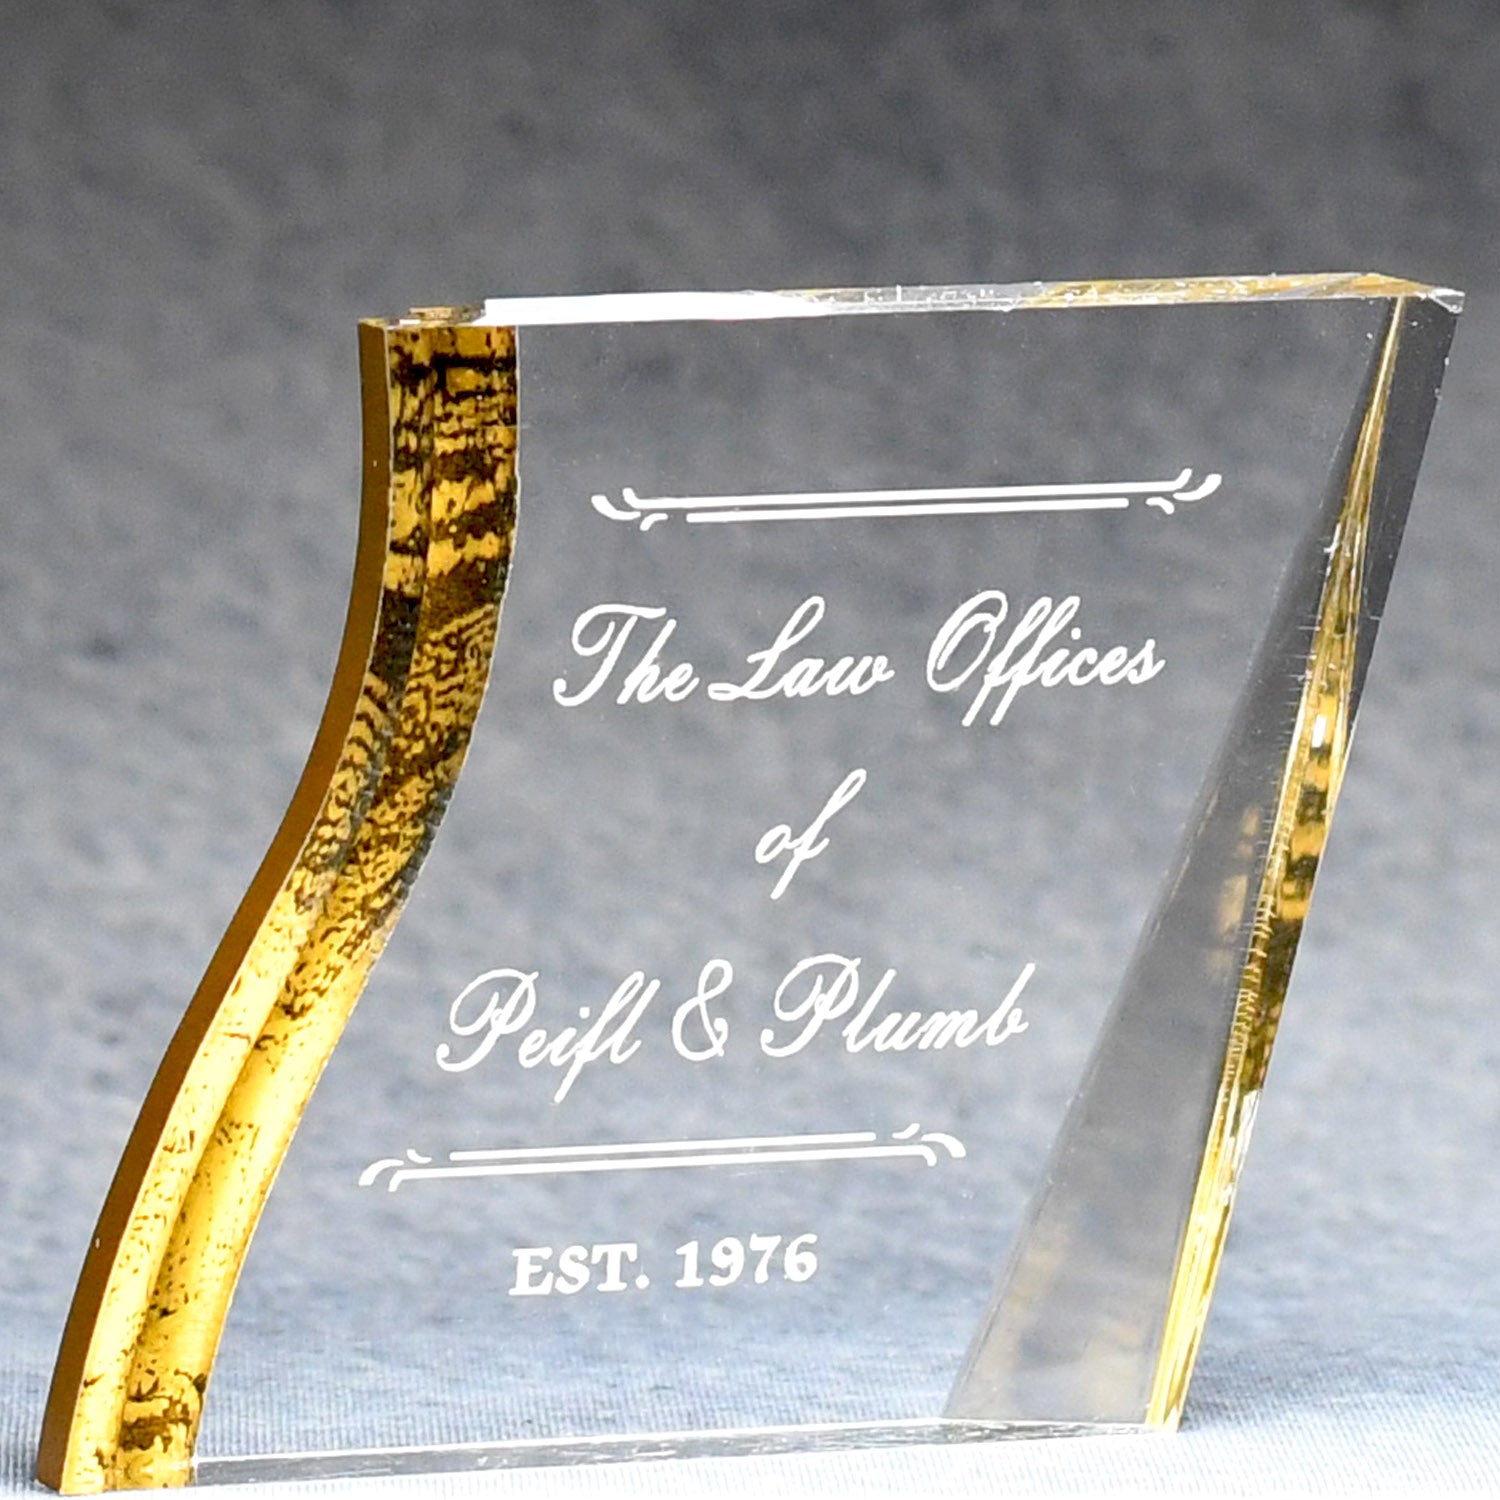 Acrylic Angled Square Paperweight | Alliance Awards LLC.